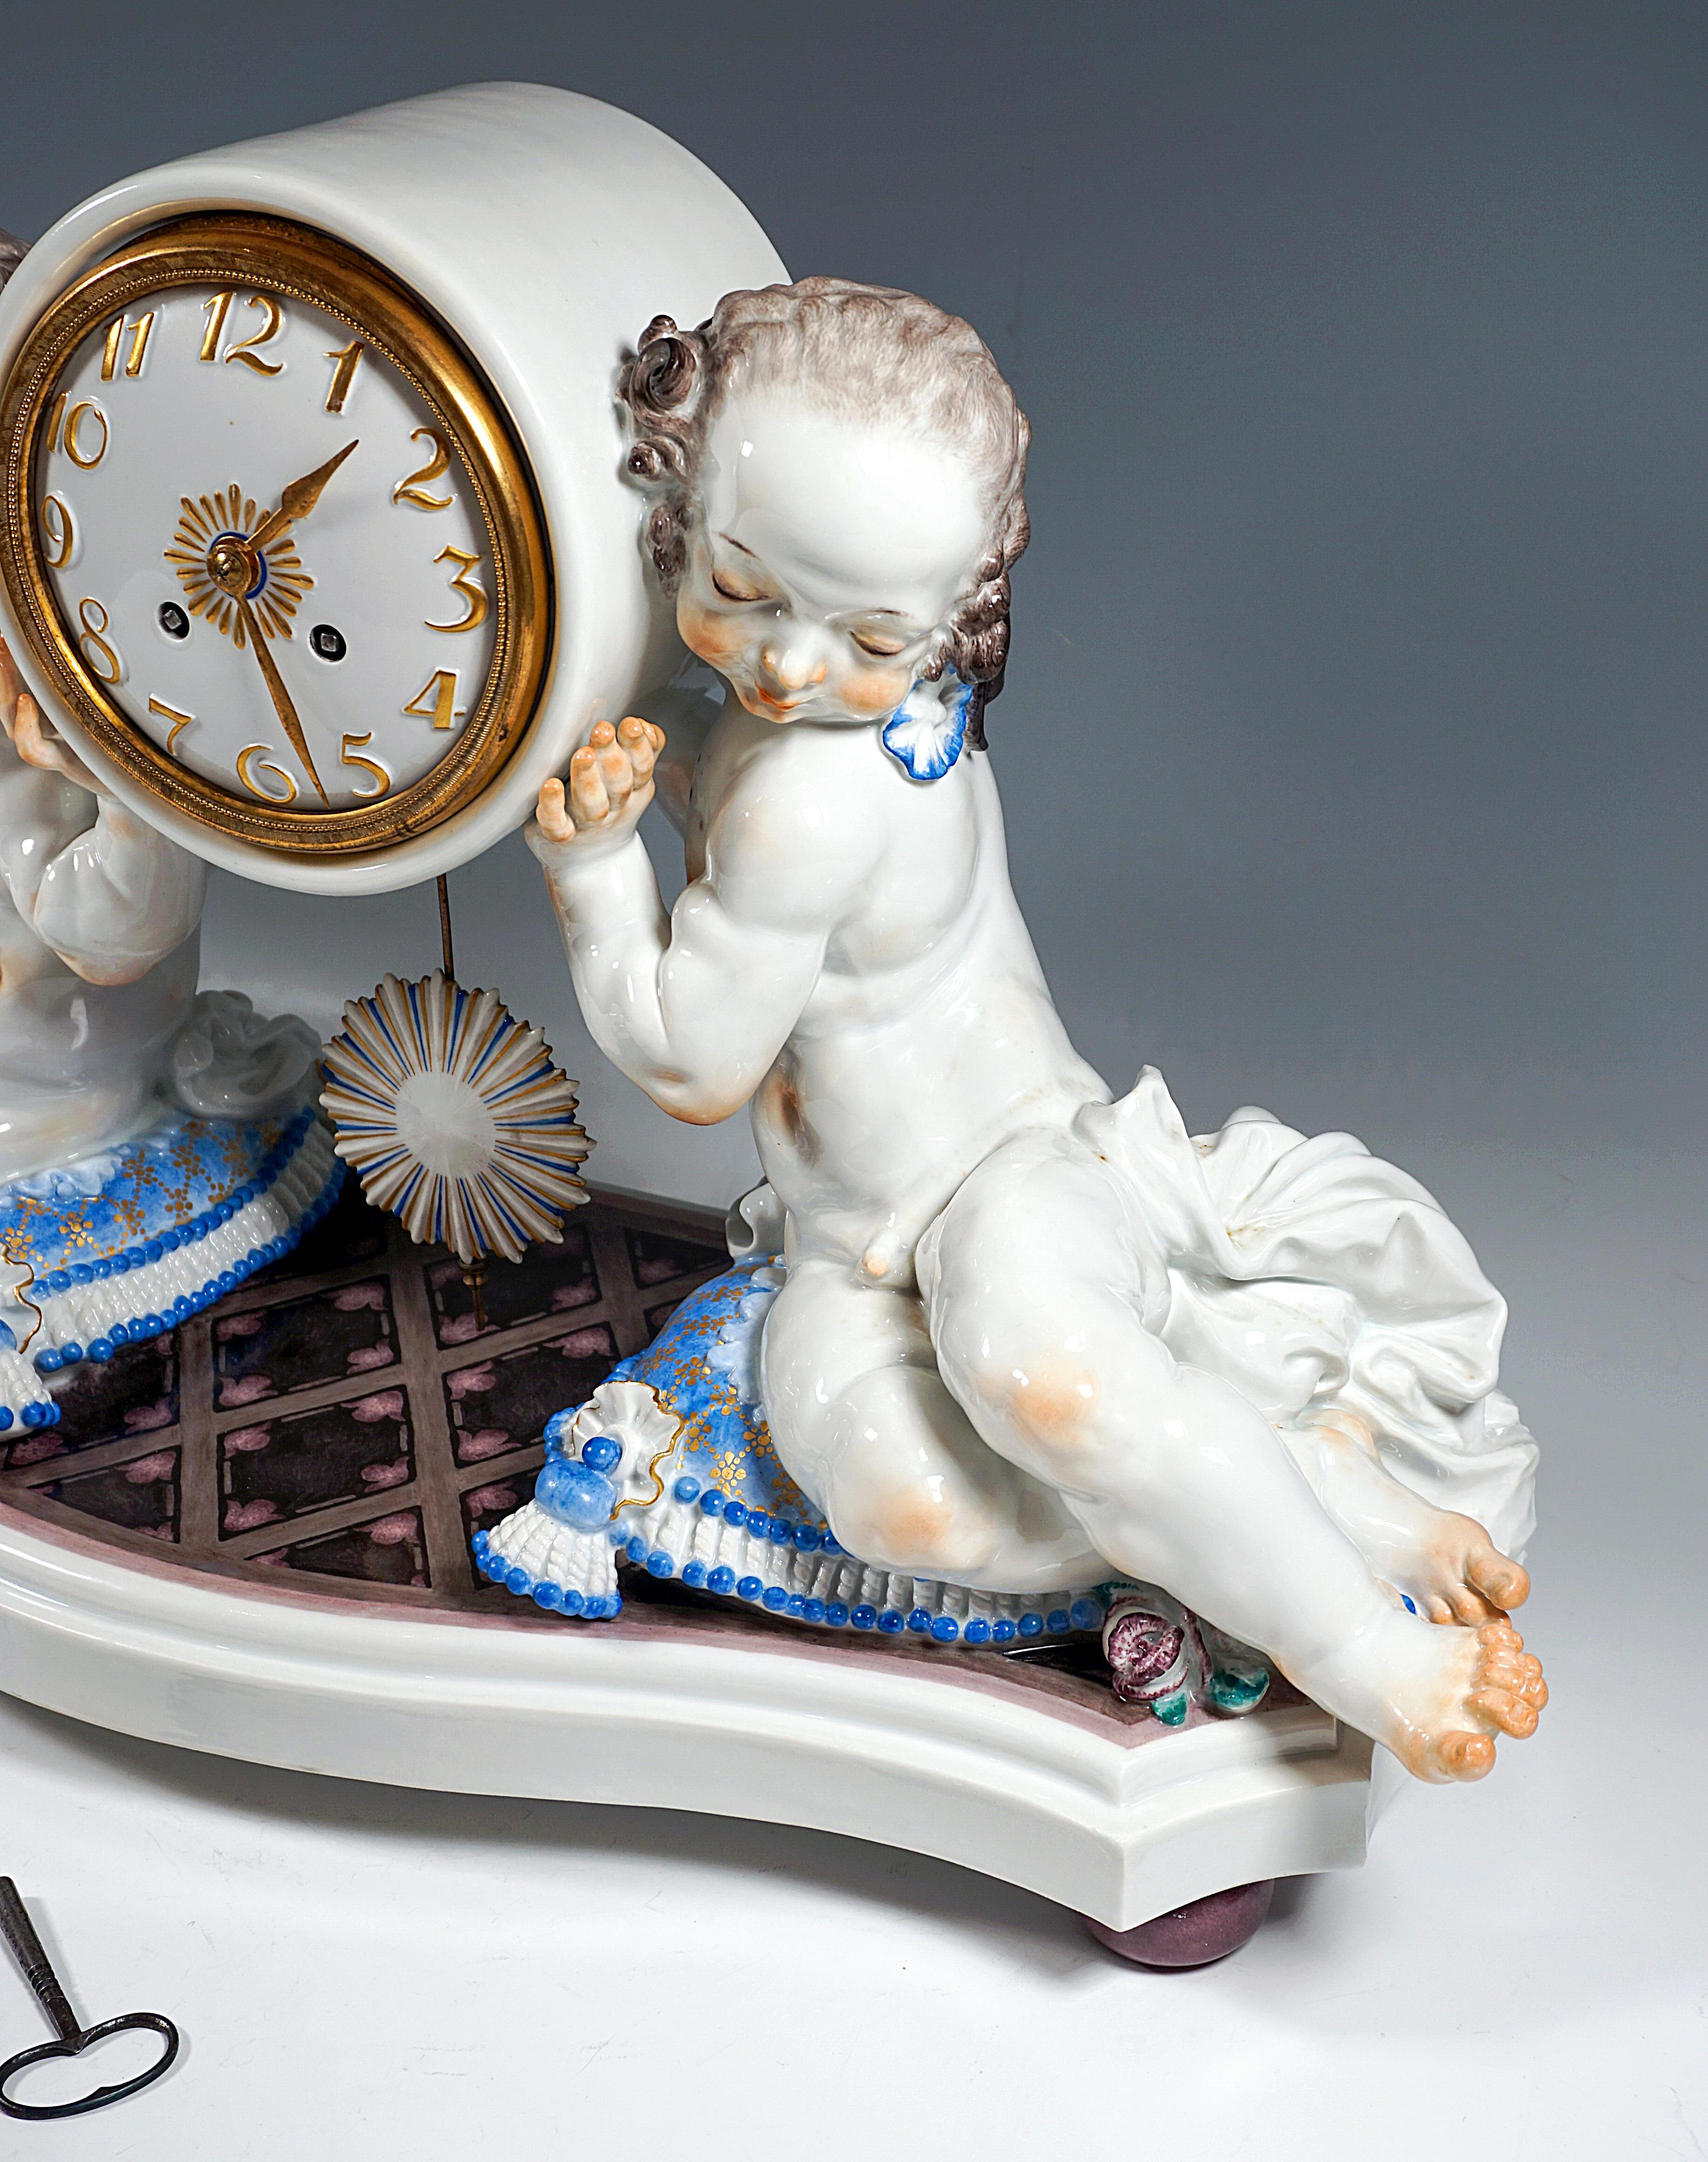 Painted Meissen Art Déco Mantle Clock with Two Putti by Paul Scheurich 1934-1947